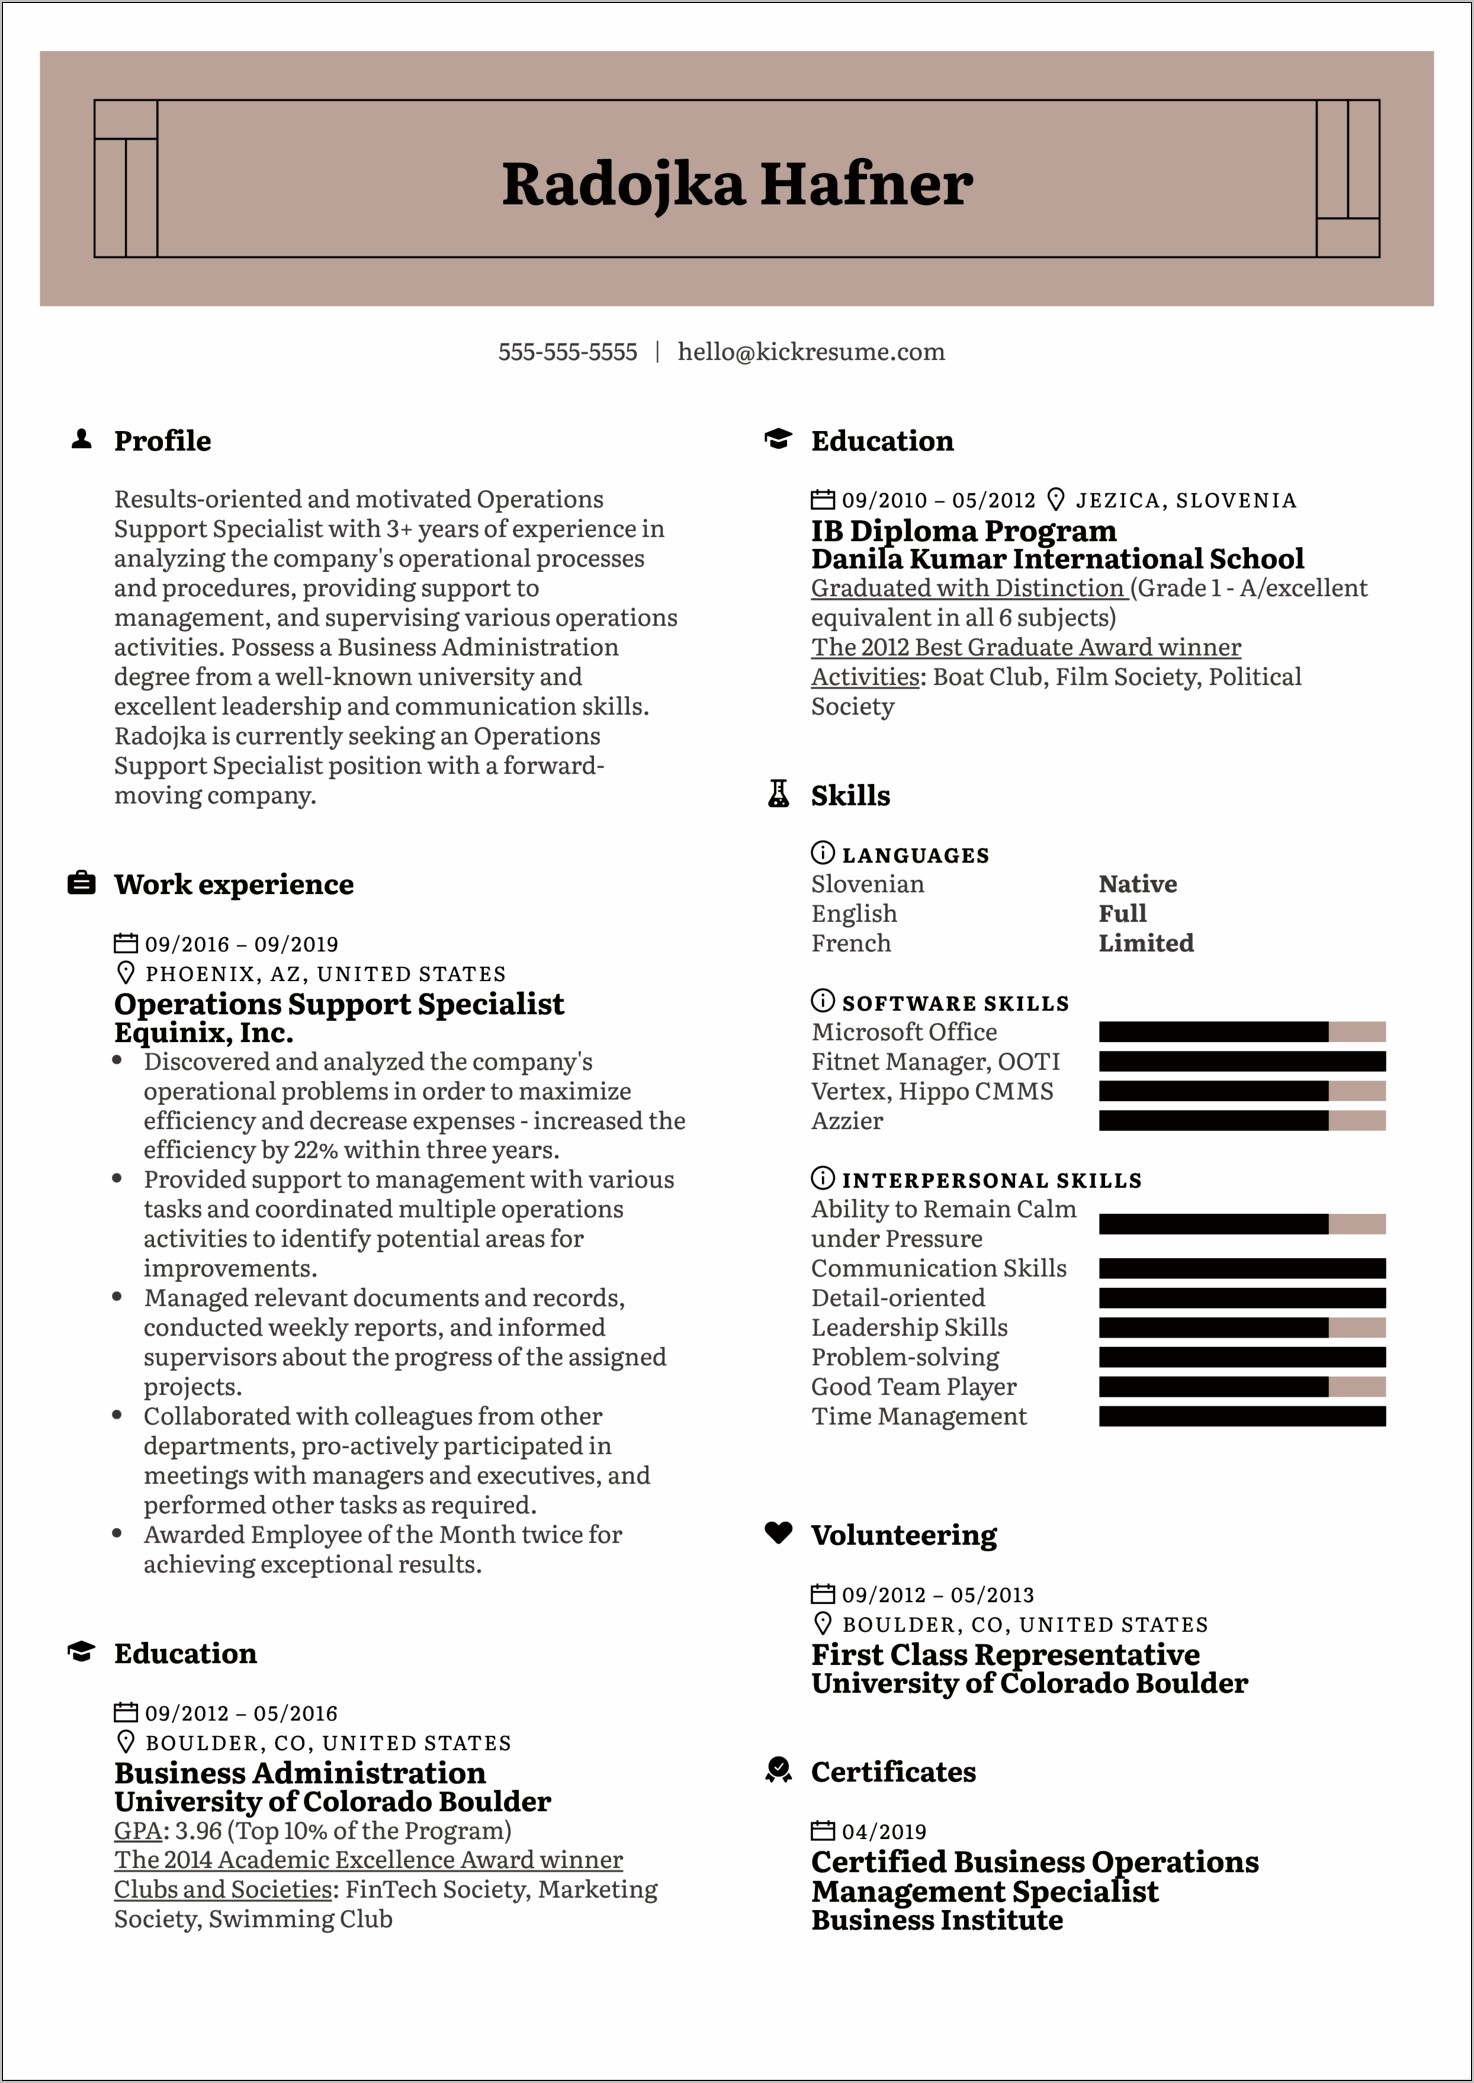 Marketing Communications Specialist Resume Examples